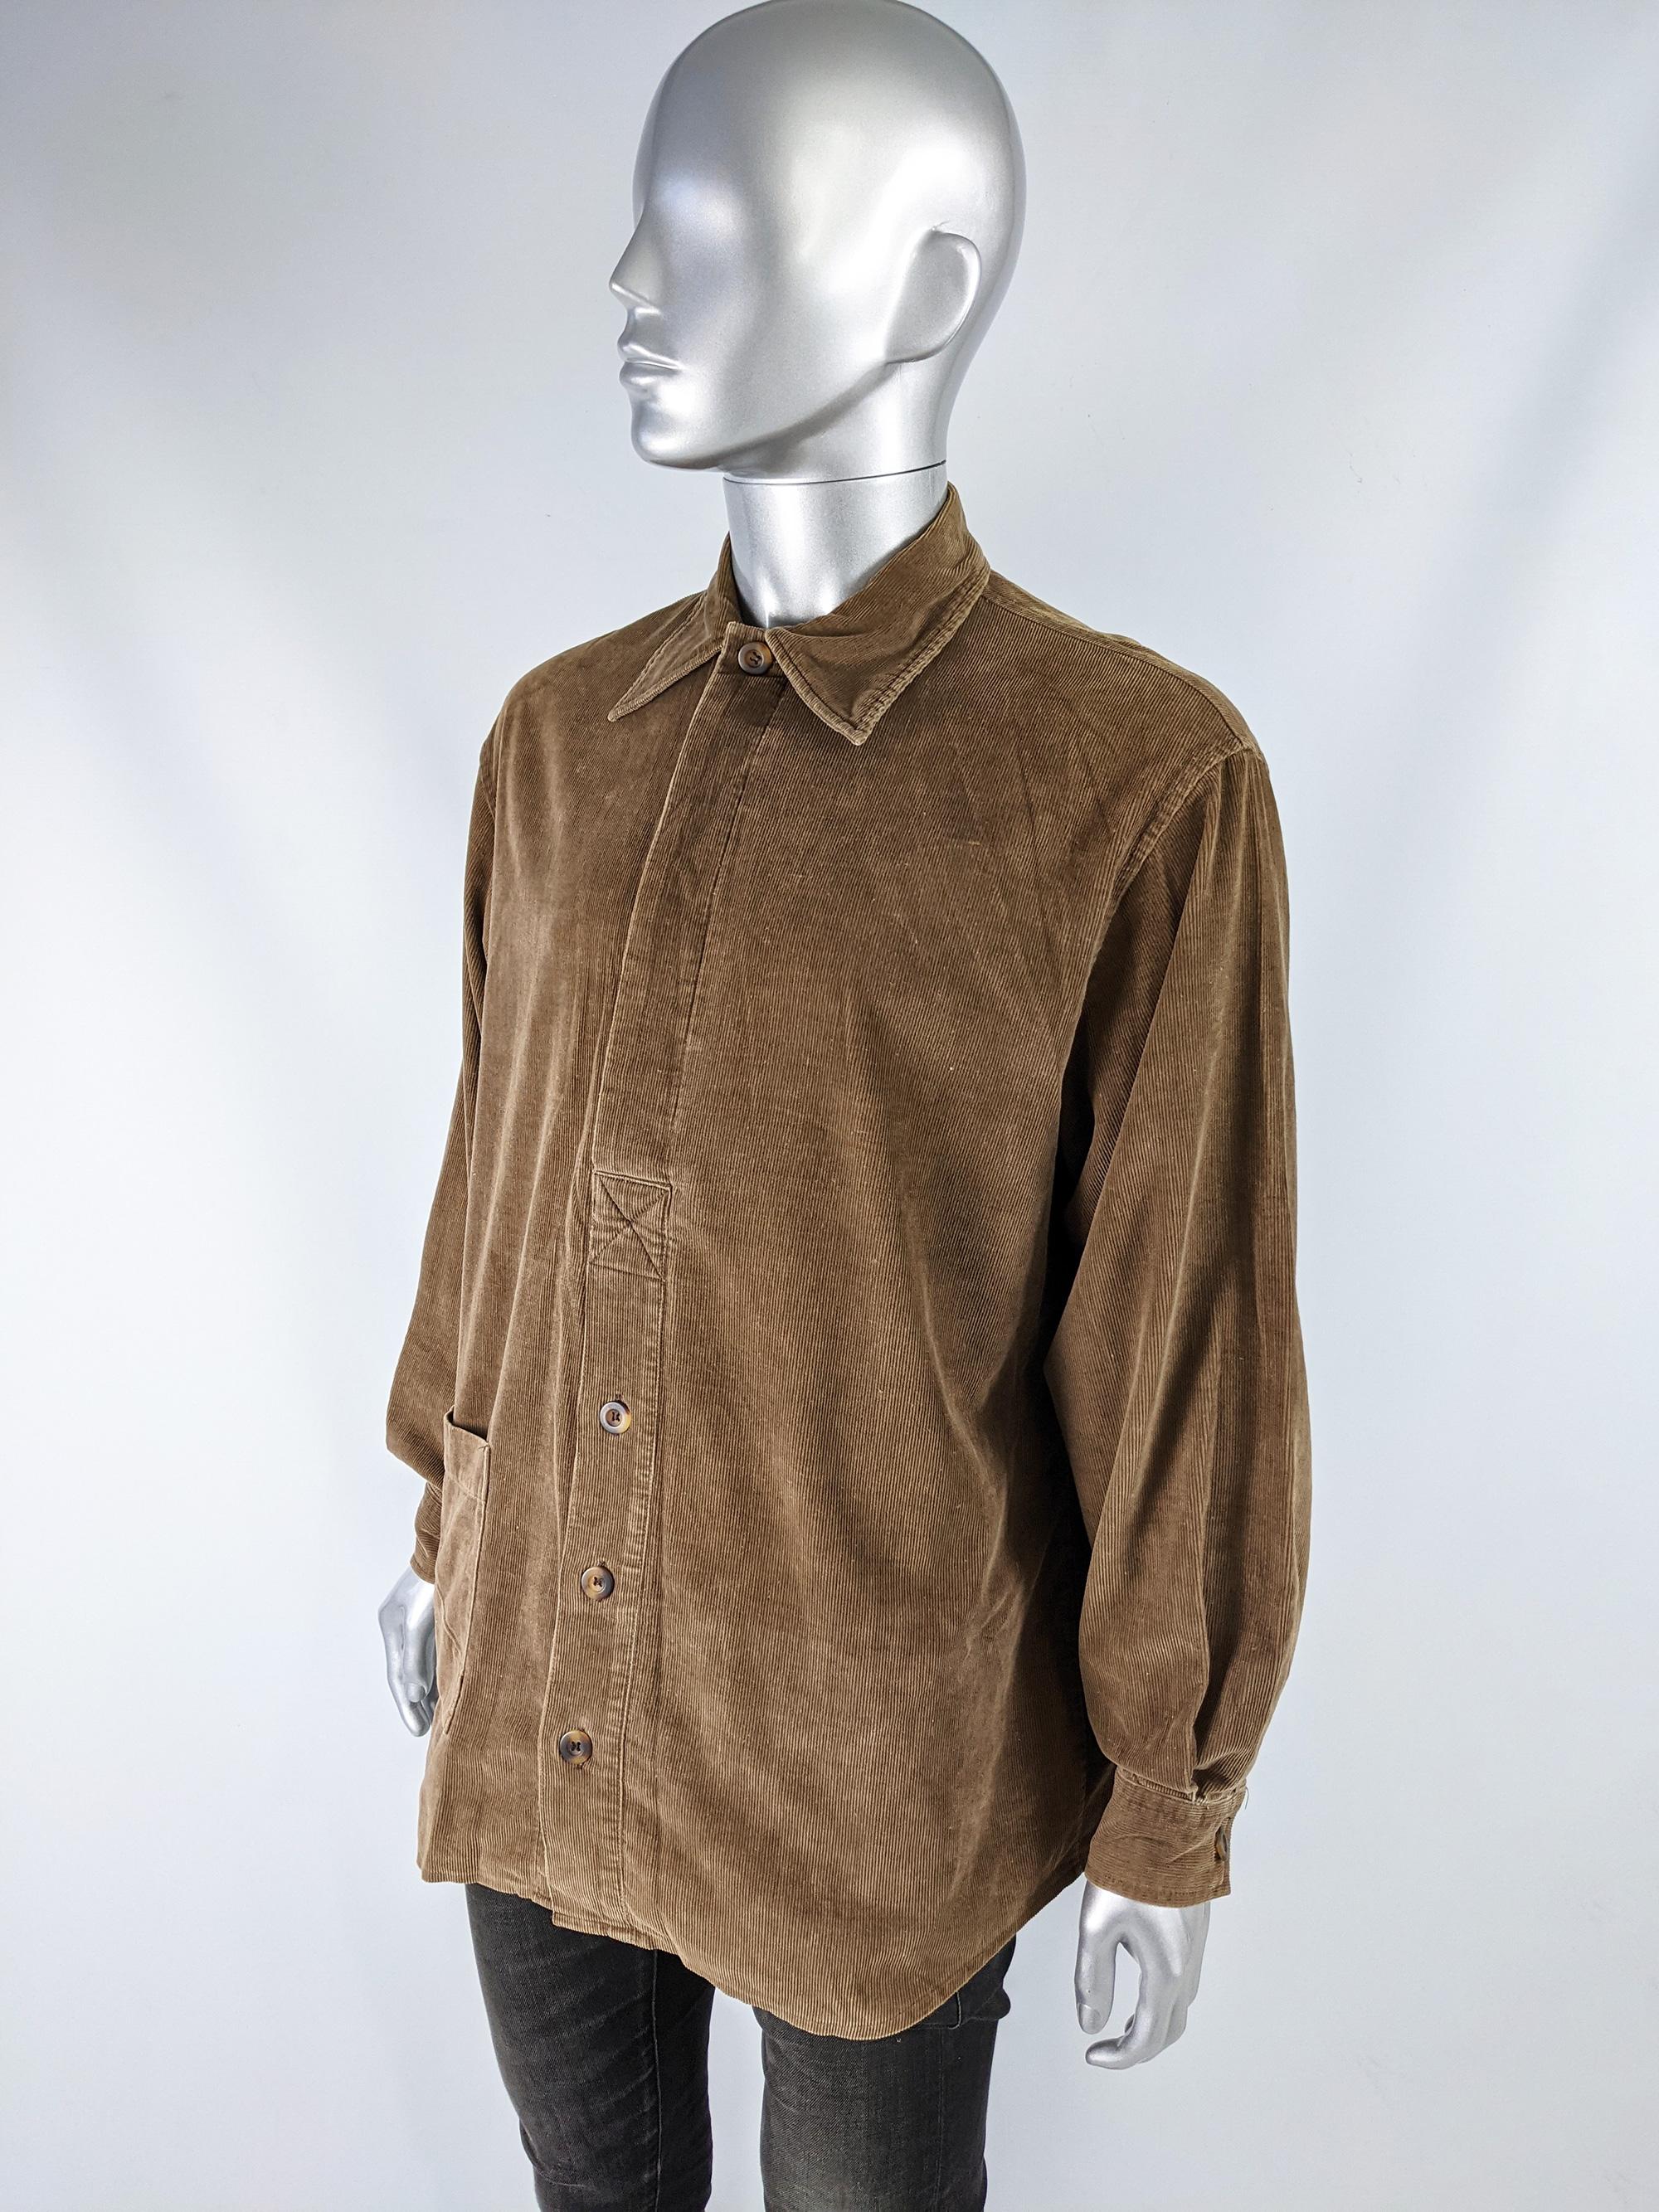 Joe Casely Hayford Vintage Brown Cord Shirt, 1990s In Excellent Condition In Doncaster, South Yorkshire